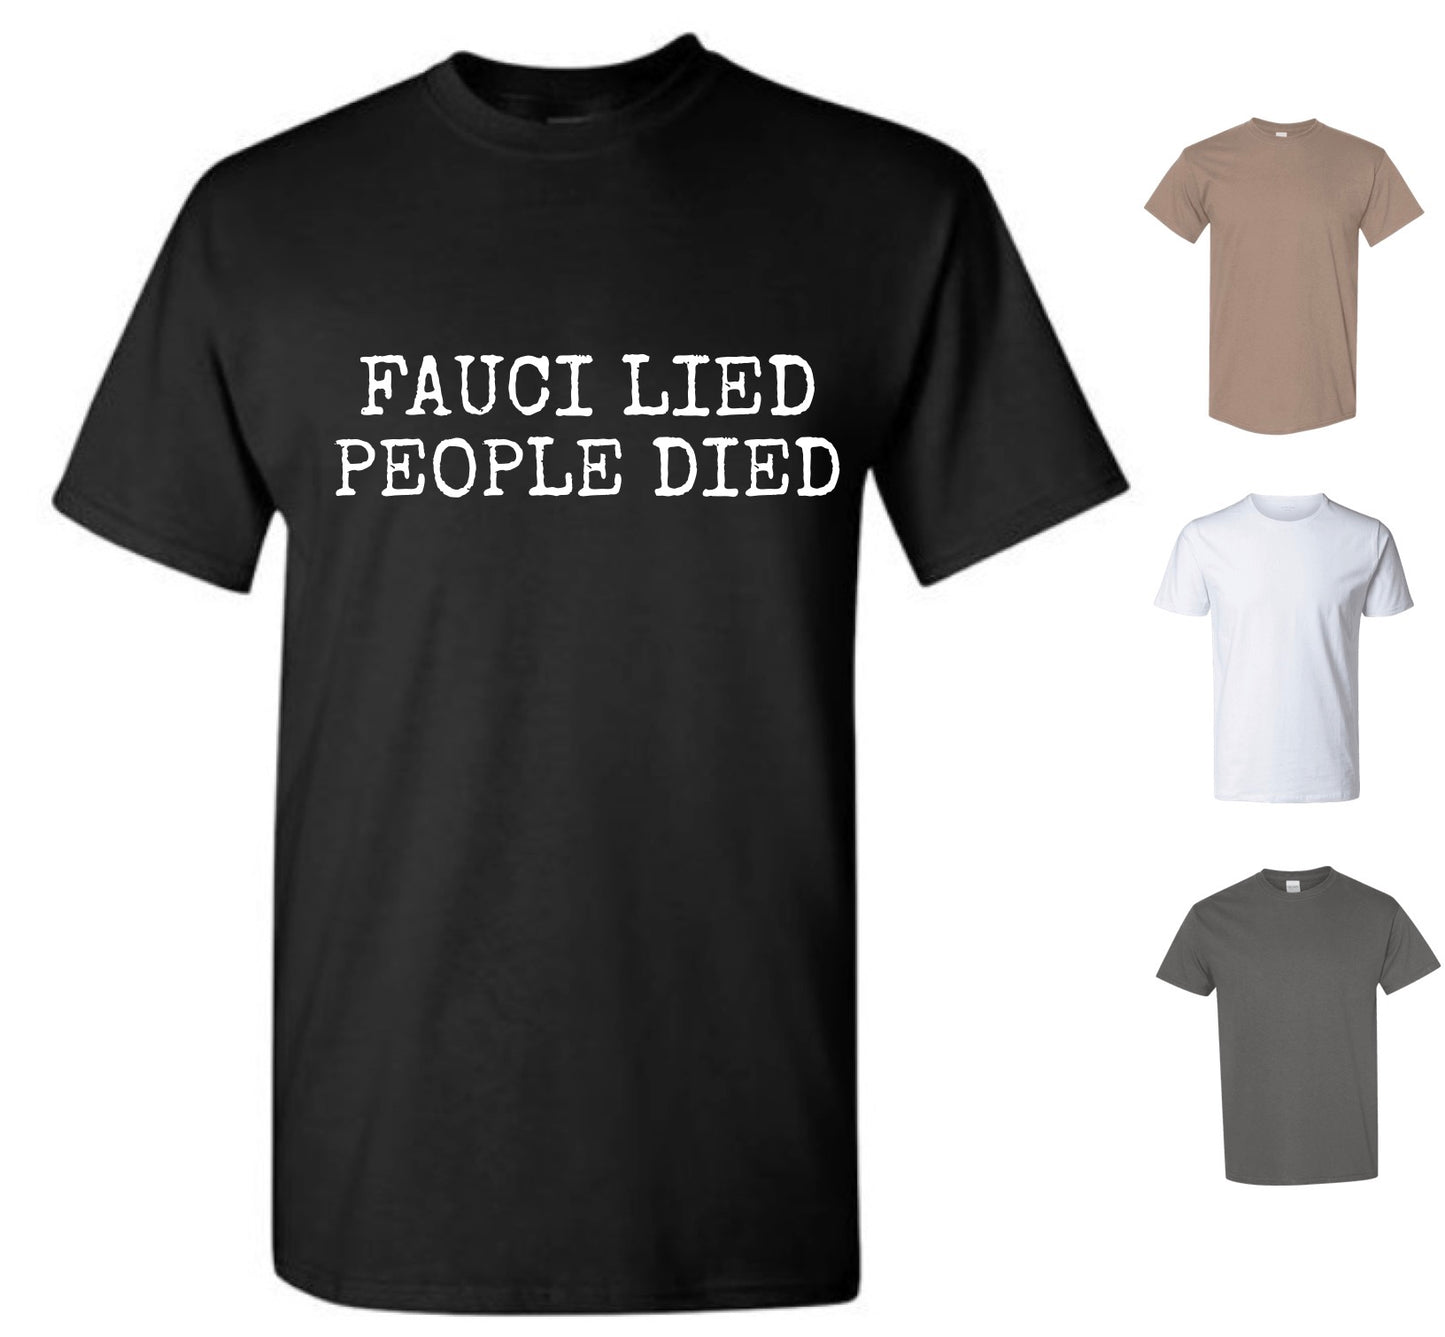 Fauci Lied, People Died T-Shirt